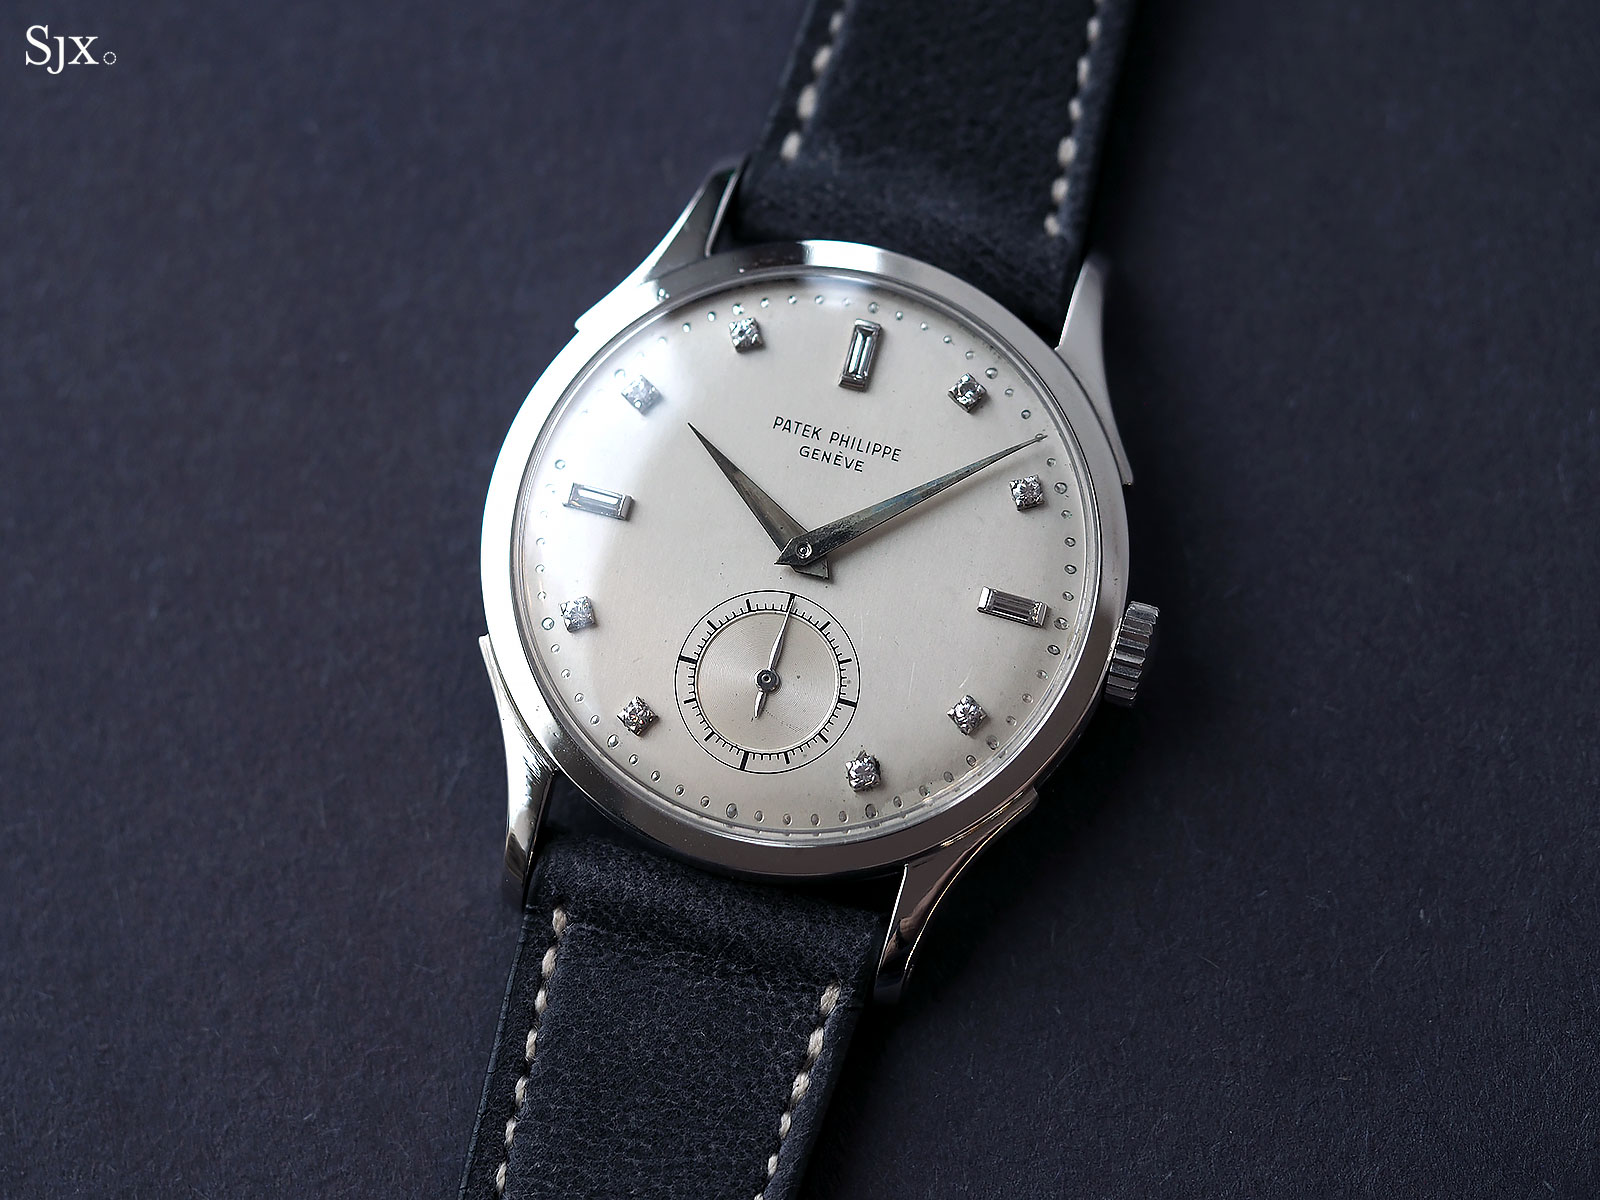 Highlights at Phillips’ New York Watch Auction | SJX Watches